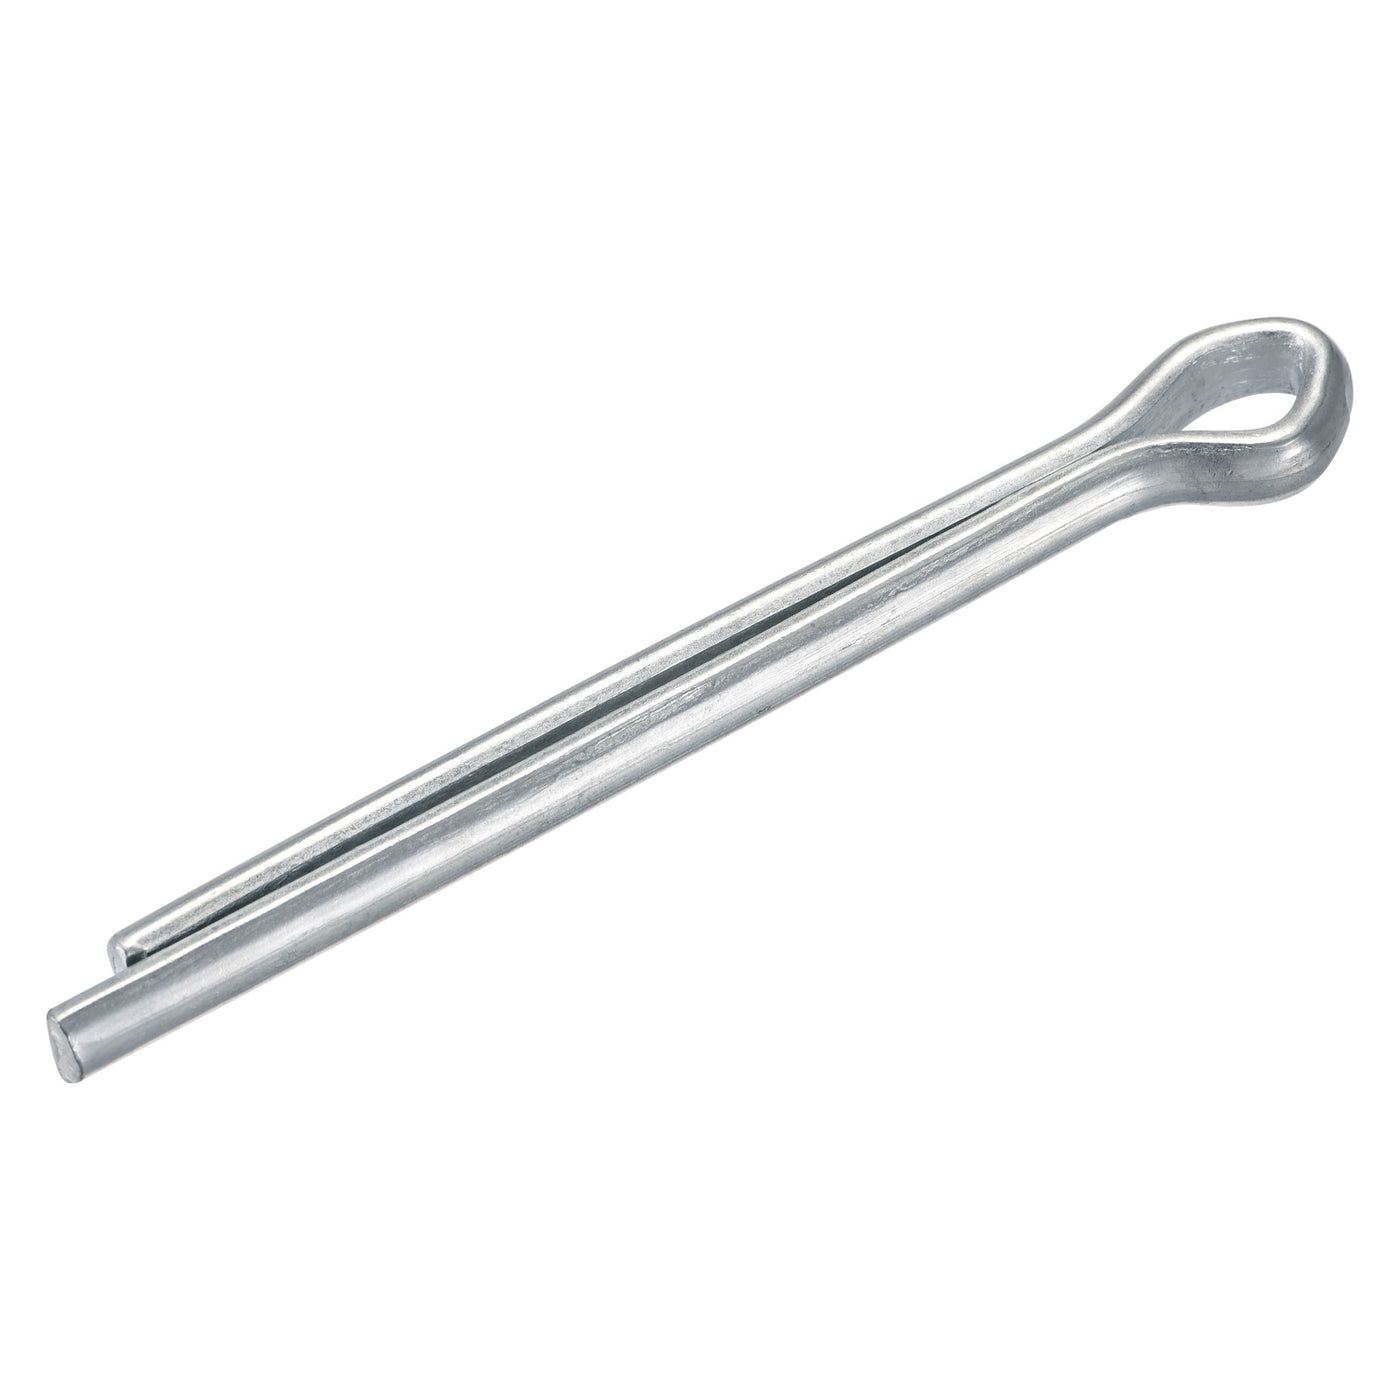 Uxcell Uxcell Split Cotter Pin, 12mm x 120mm Carbon Steel Clip Fastener Fitting for Automotive, Mechanics, Silver Tone